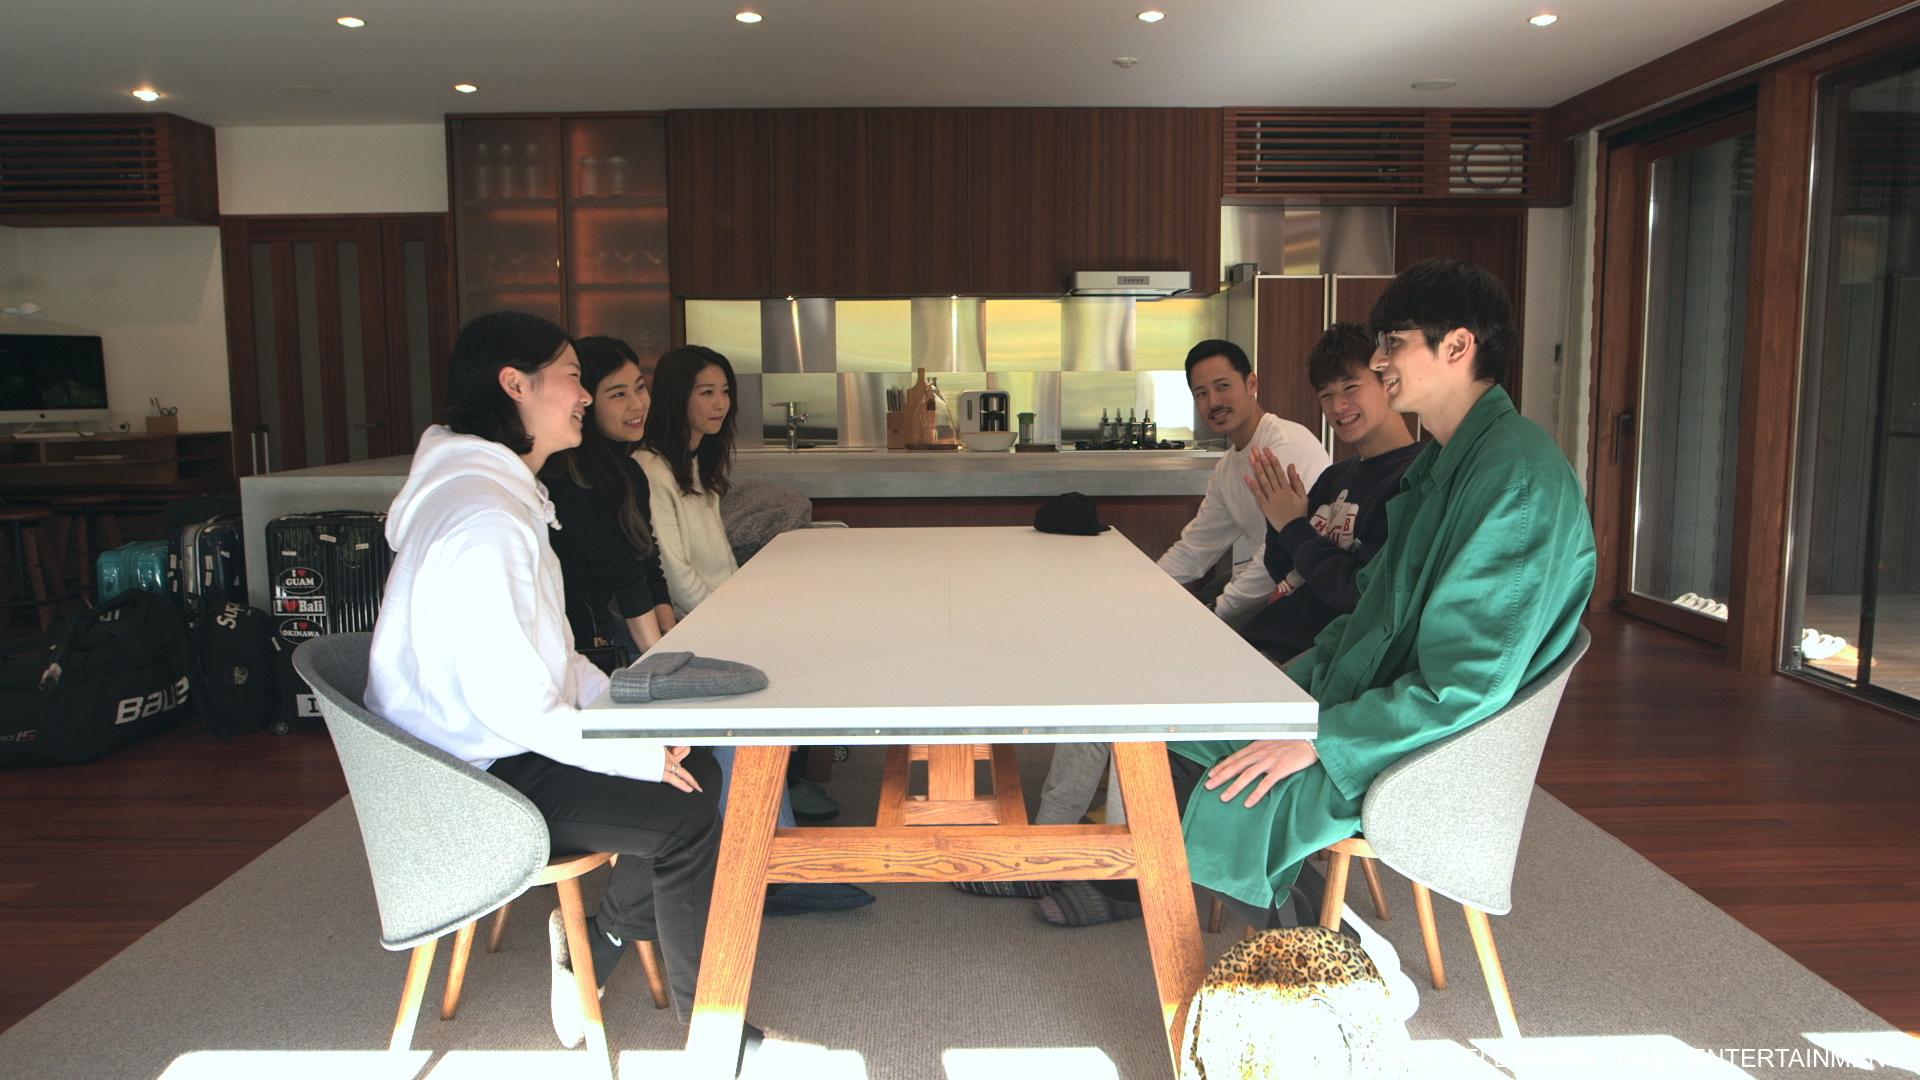 Tsubasa Sato (front left) and Shion Okamoto with the cast of Terrace House: Opening New Doors (1)